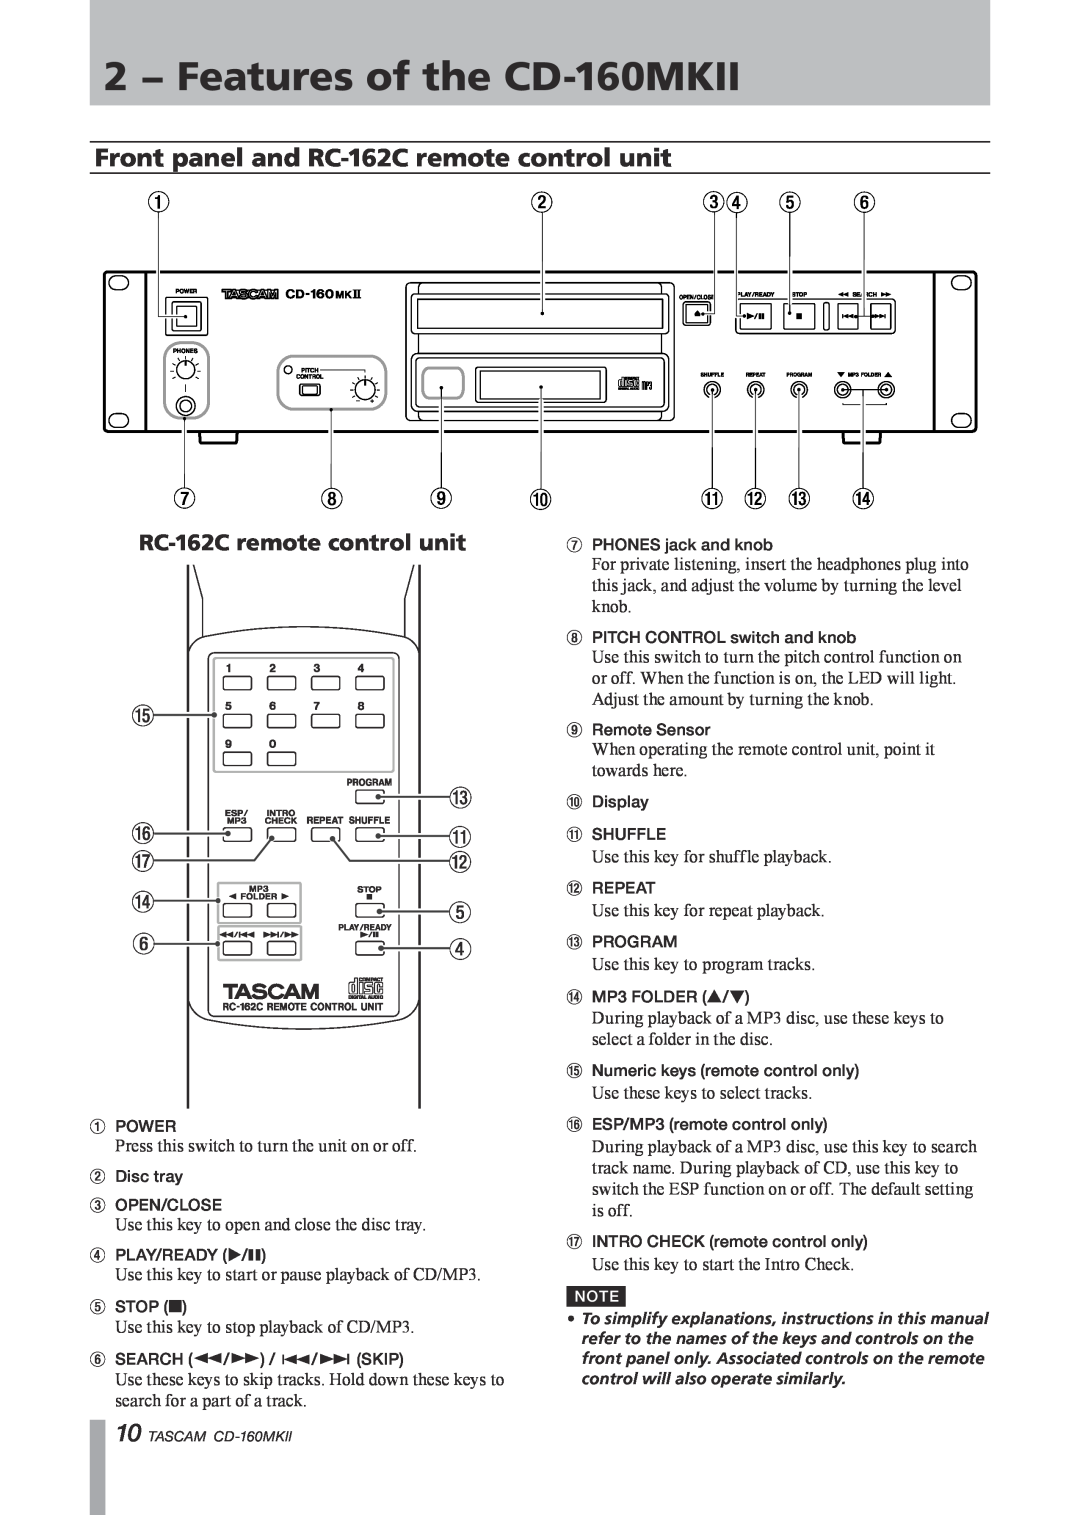 Tascam owner manual 2 − Features of the CD-160MKII, Front panel and RC-162Cremote control unit 